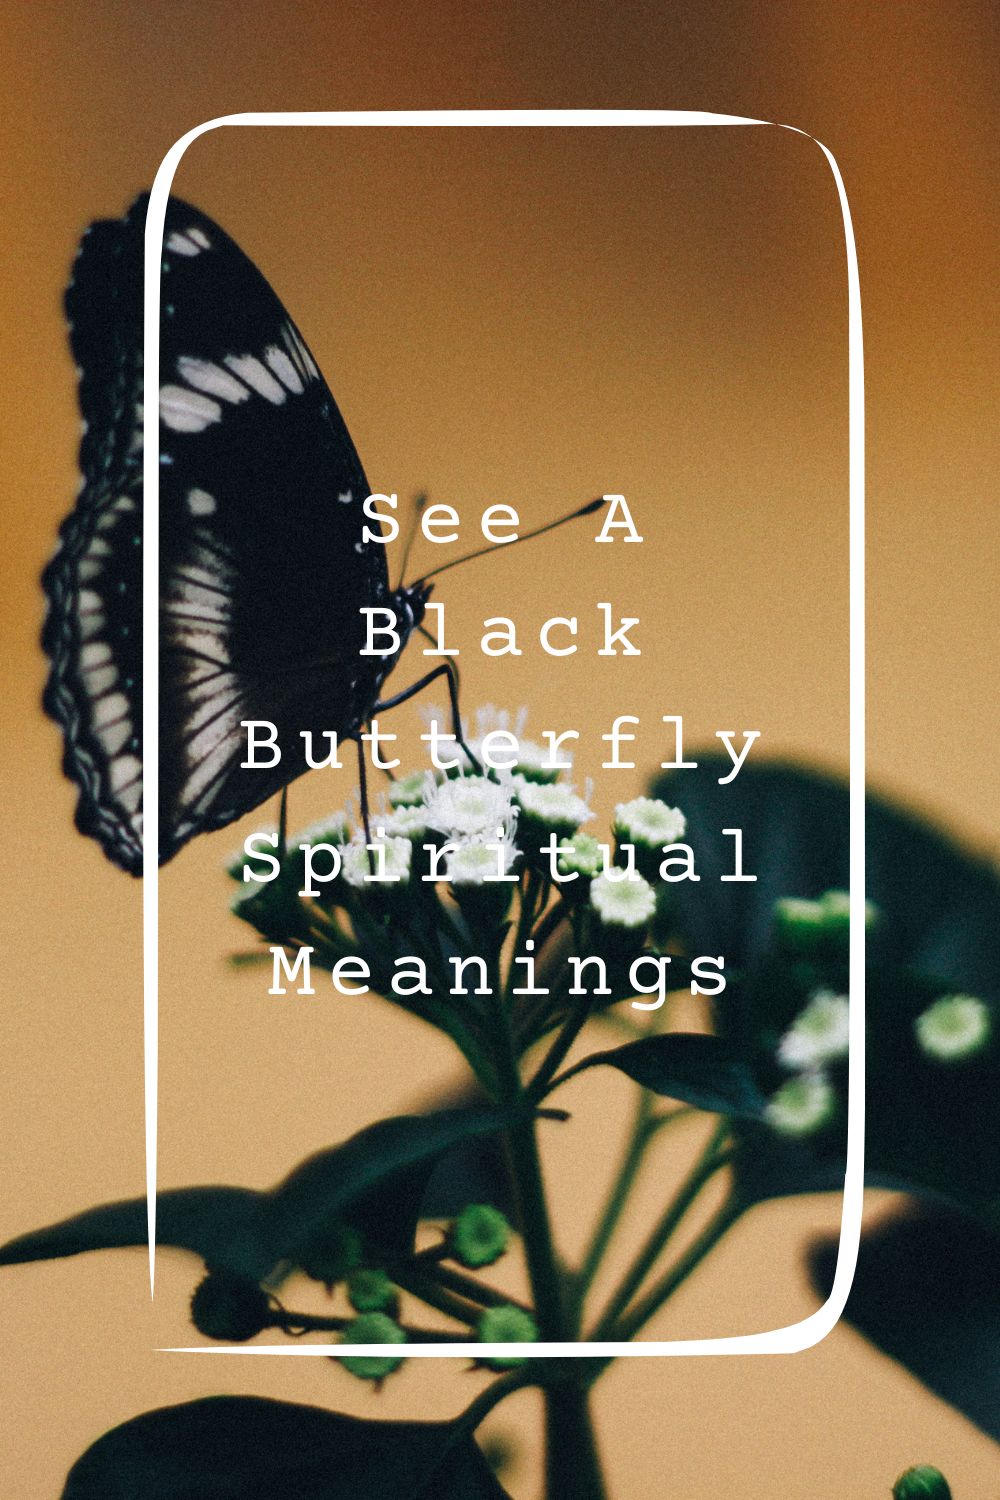 16 See A Black Butterfly Spiritual Meanings4